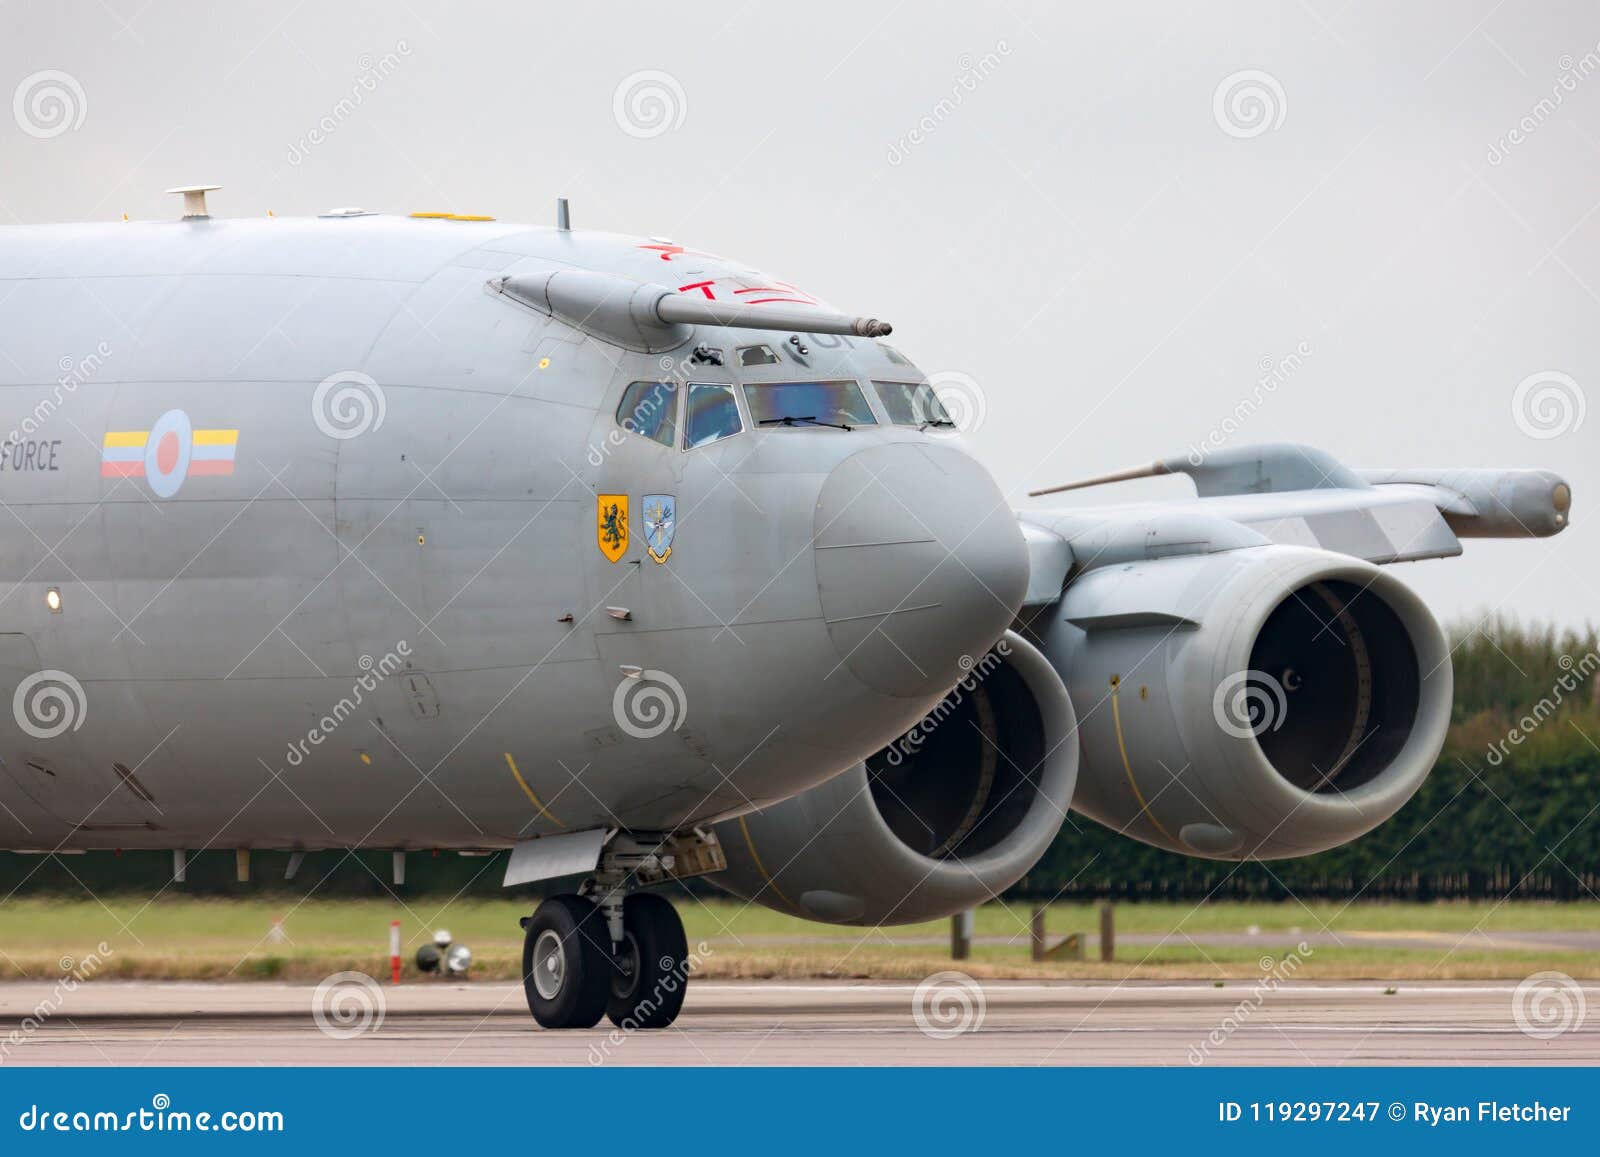 Royal Air Force Raf Boeing E 3d Sentry Airborne Early Warning Awacs Aircraft Zh101 At Royal Air Force Station Waddington Editorial Photography Image Of Armed Force